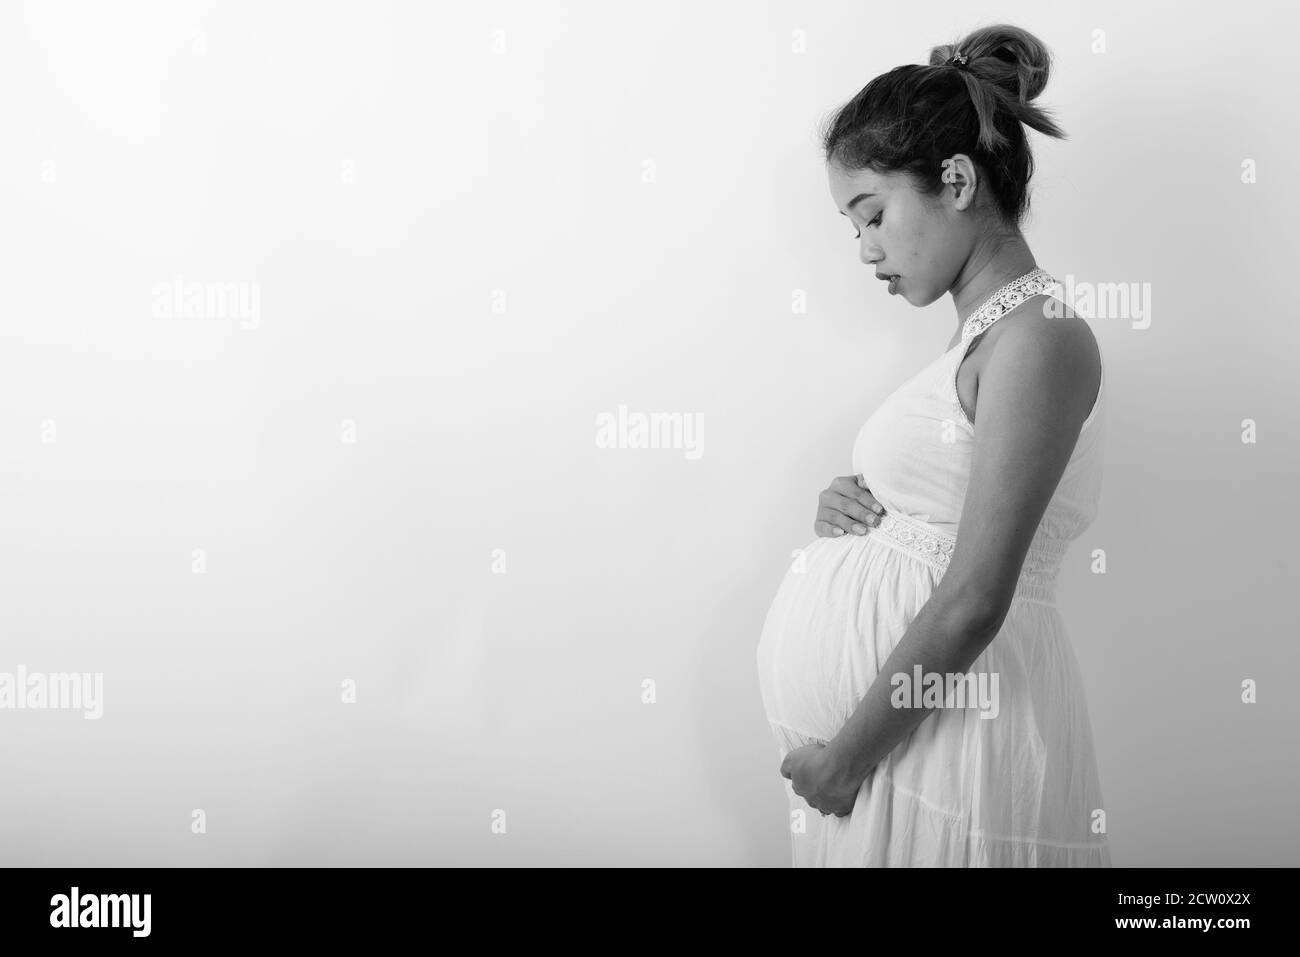 Profile view of young Asian pregnant woman holding her stomach against white background Stock Photo